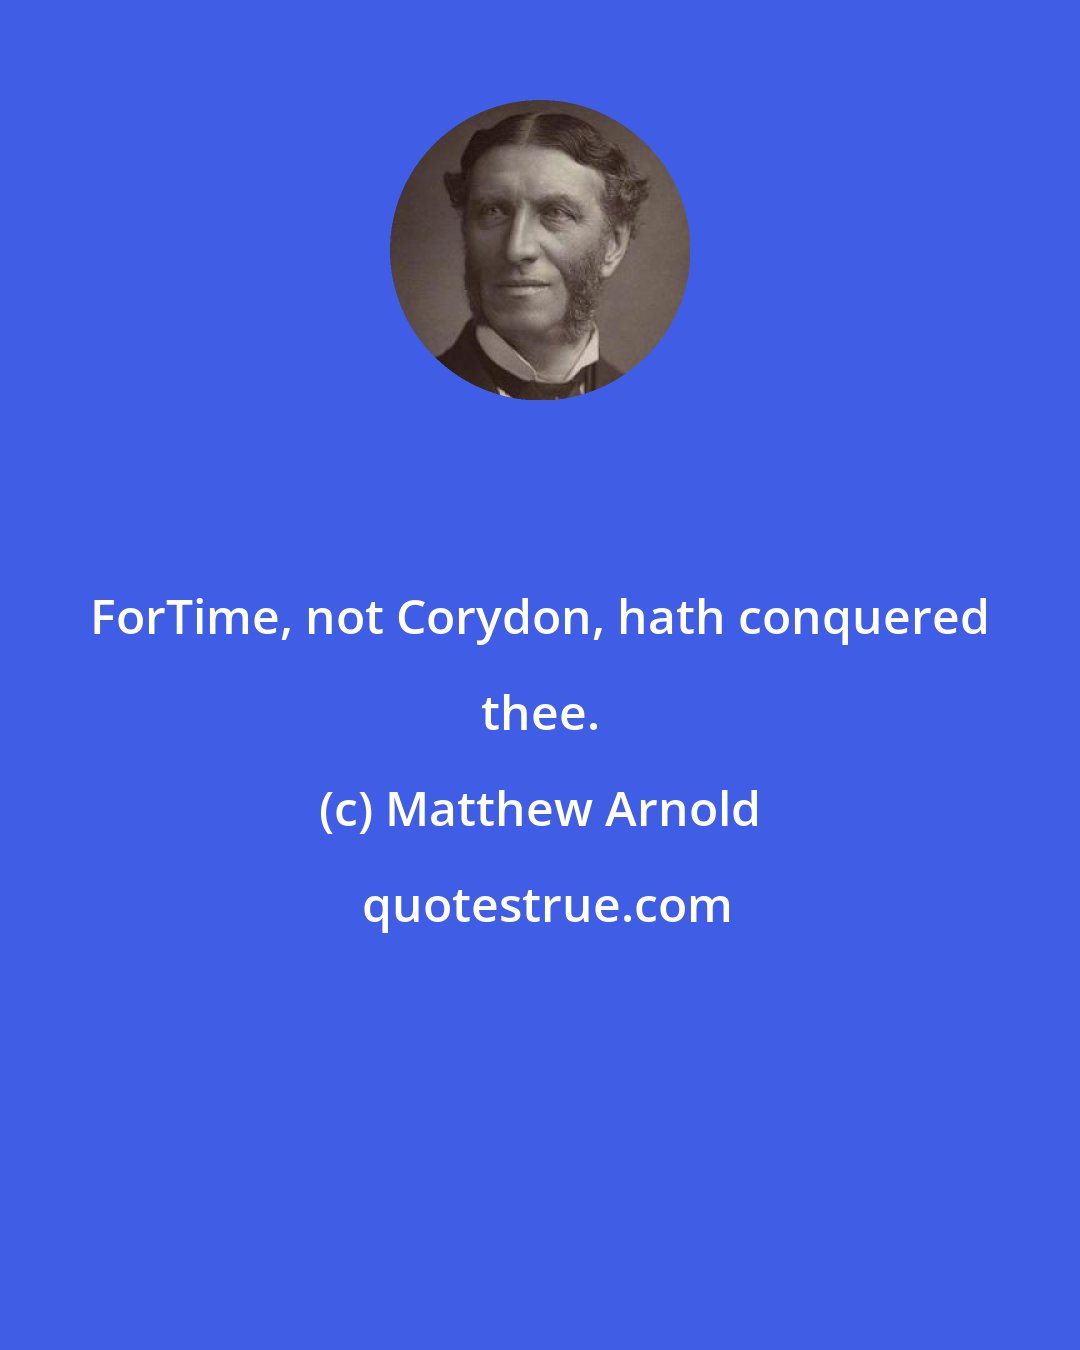 Matthew Arnold: ForTime, not Corydon, hath conquered thee.